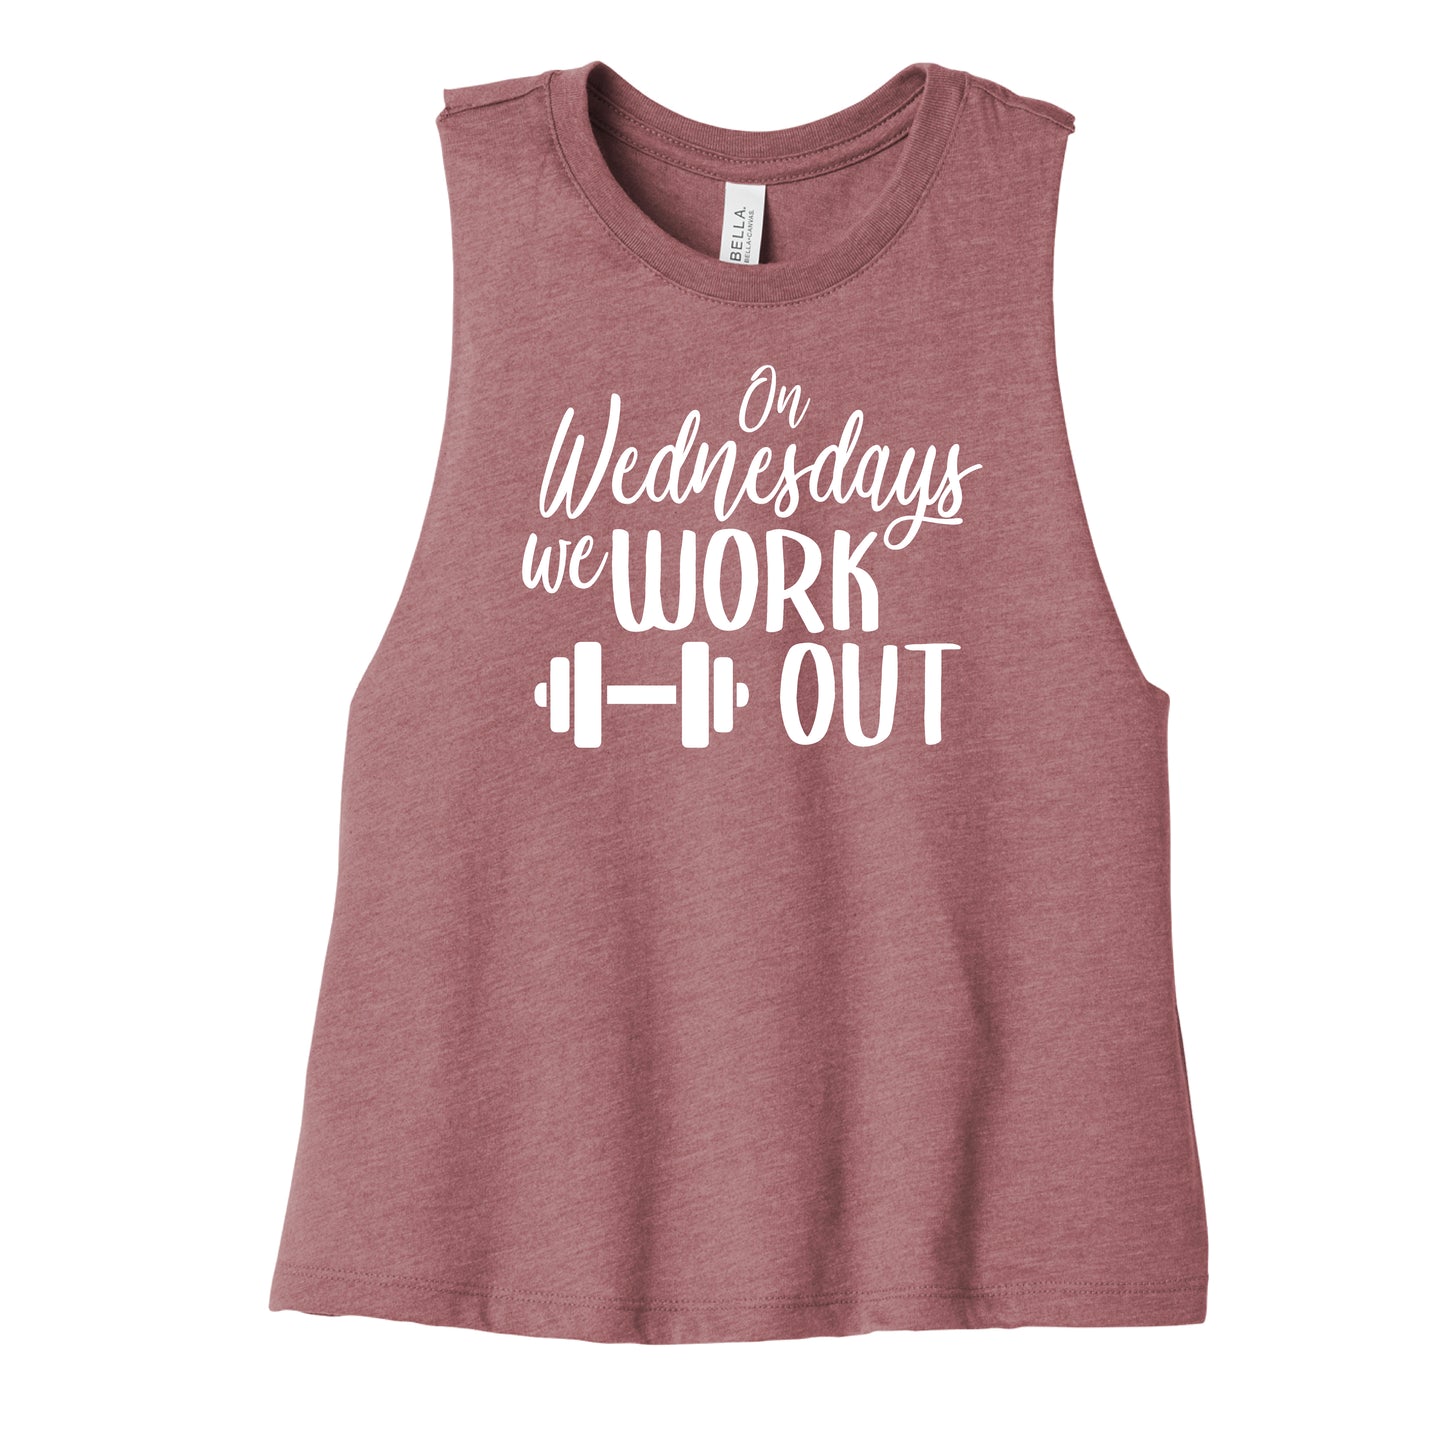 On Wednesdays we work out- crop tank